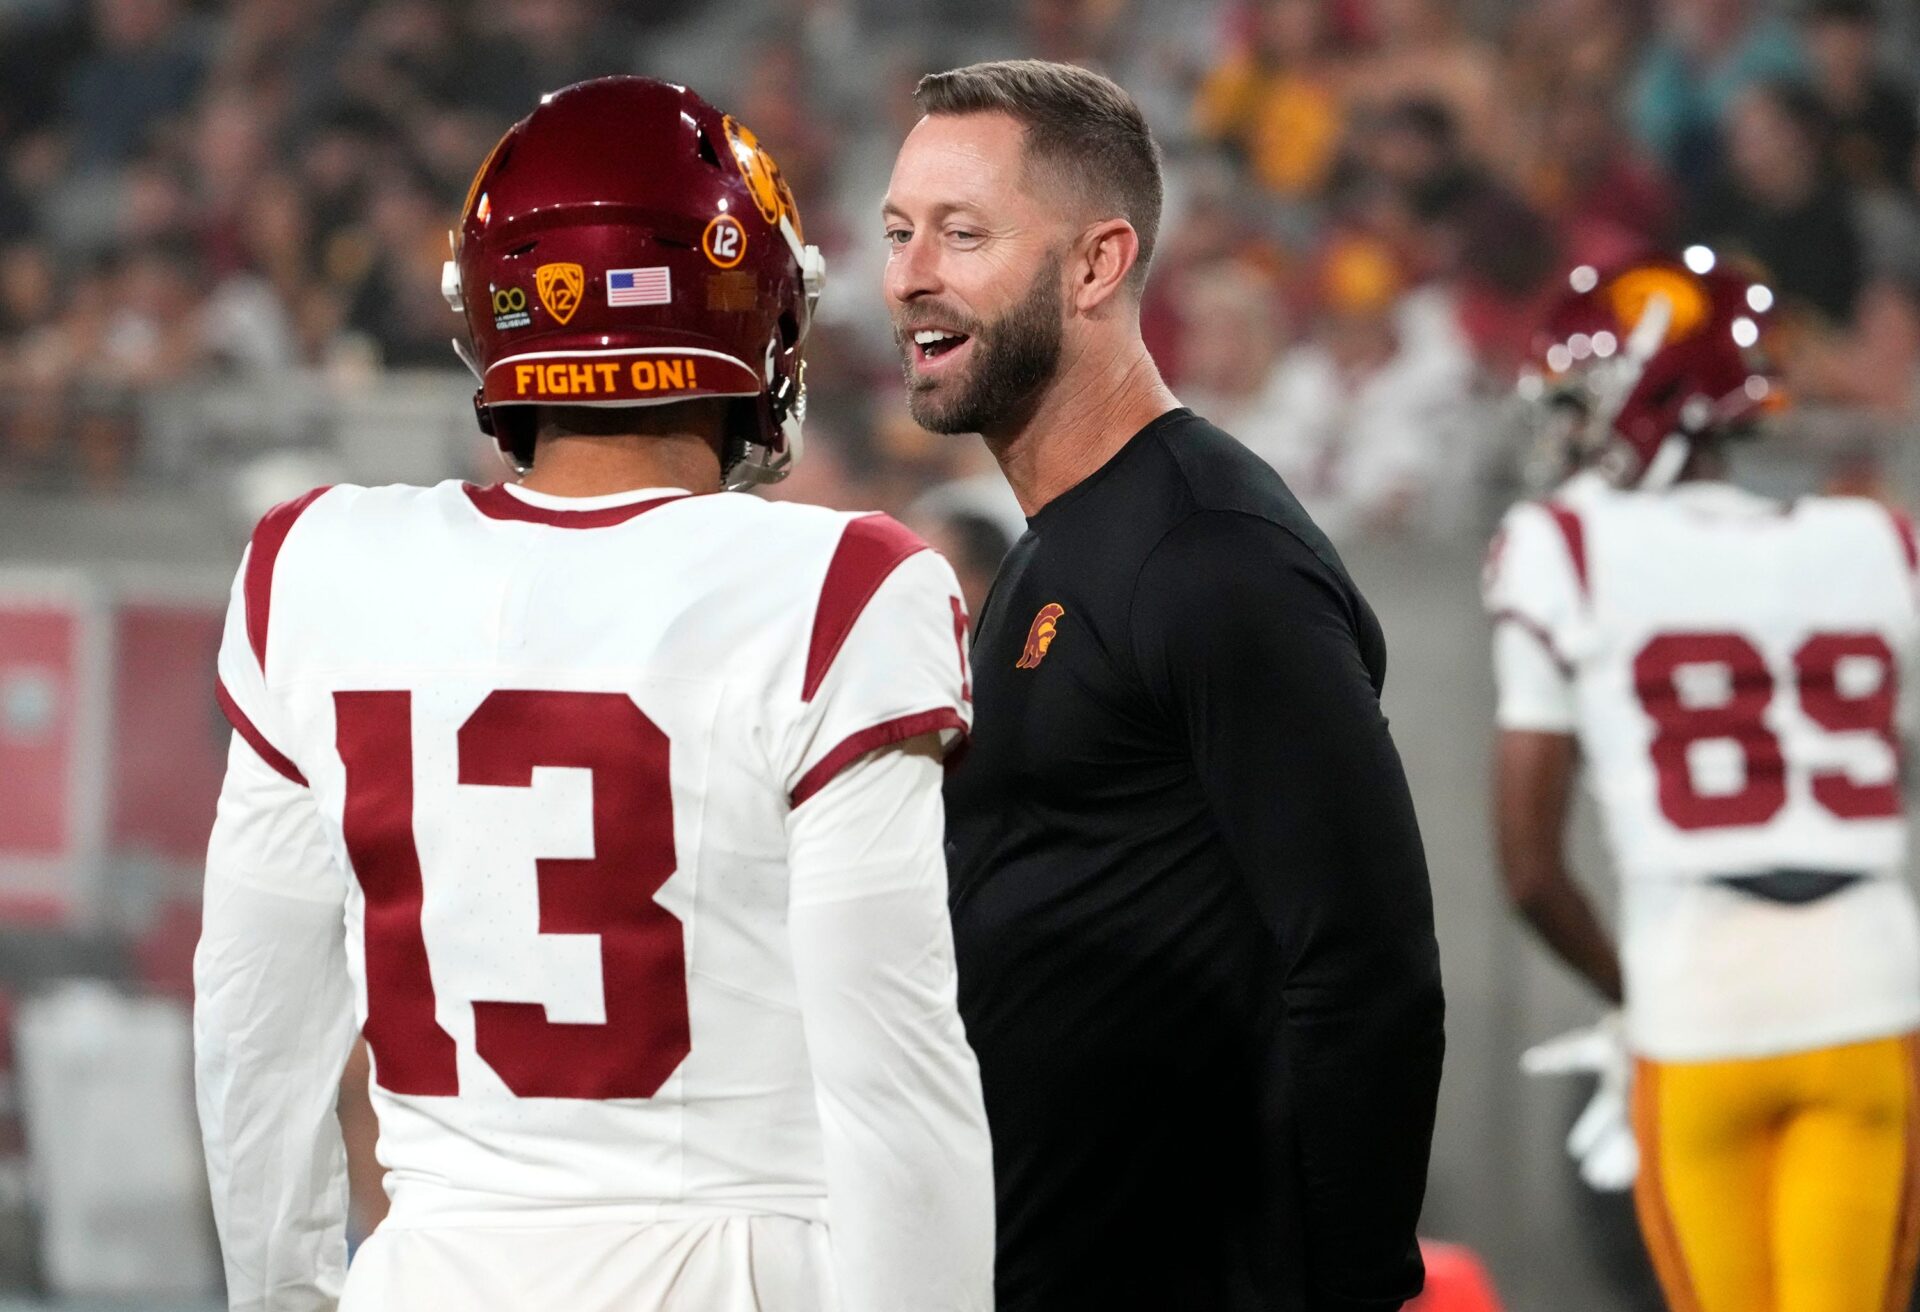 The former Arizona Cardinals head coach and now USC Trojans assistant coach Kliff Kingsbury talks to quarterback Caleb Williams (13) during the pregame warmup before playing the Arizona State Sun Devils